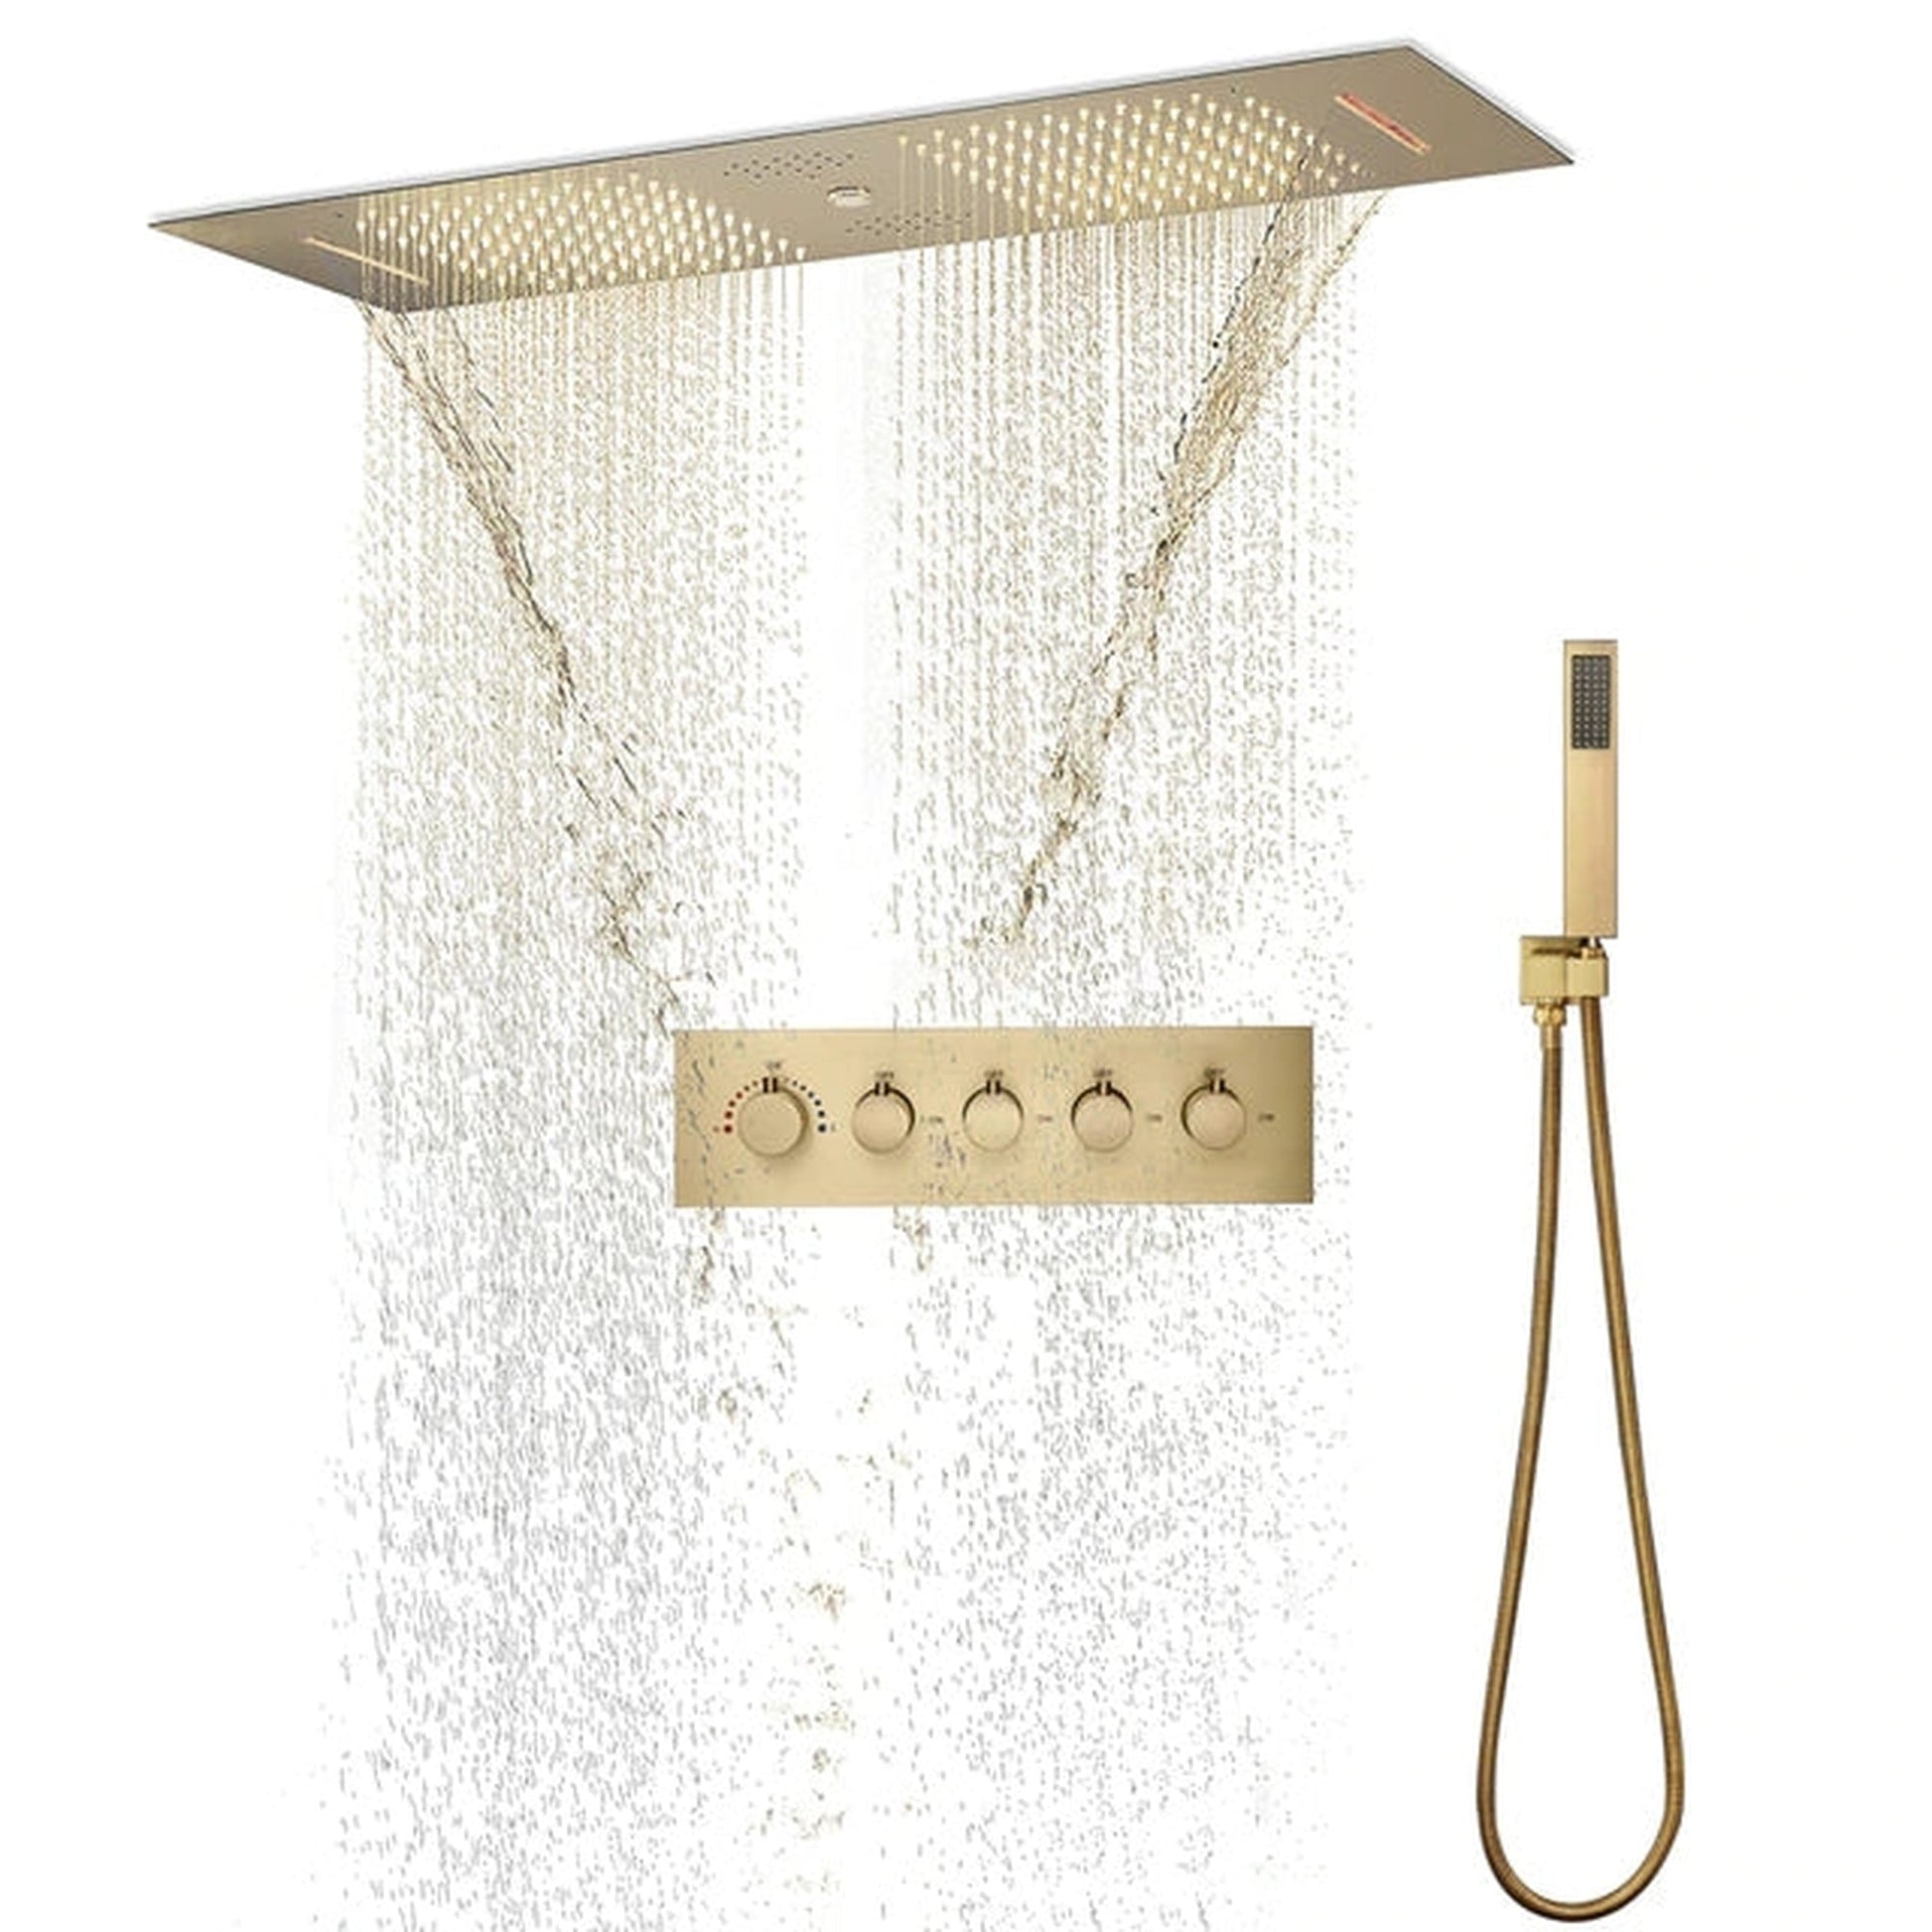 https://usbathstore.com/cdn/shop/products/Fontana-Genoa-Brushed-Gold-Rectangular-Recessed-Ceiling-Mounted-Shower-Head-Rainfall-Waterfall-LED-Shower-System-With-Touch-Panel-Control-and-Hand-Shower.jpg?v=1657125466&width=1946